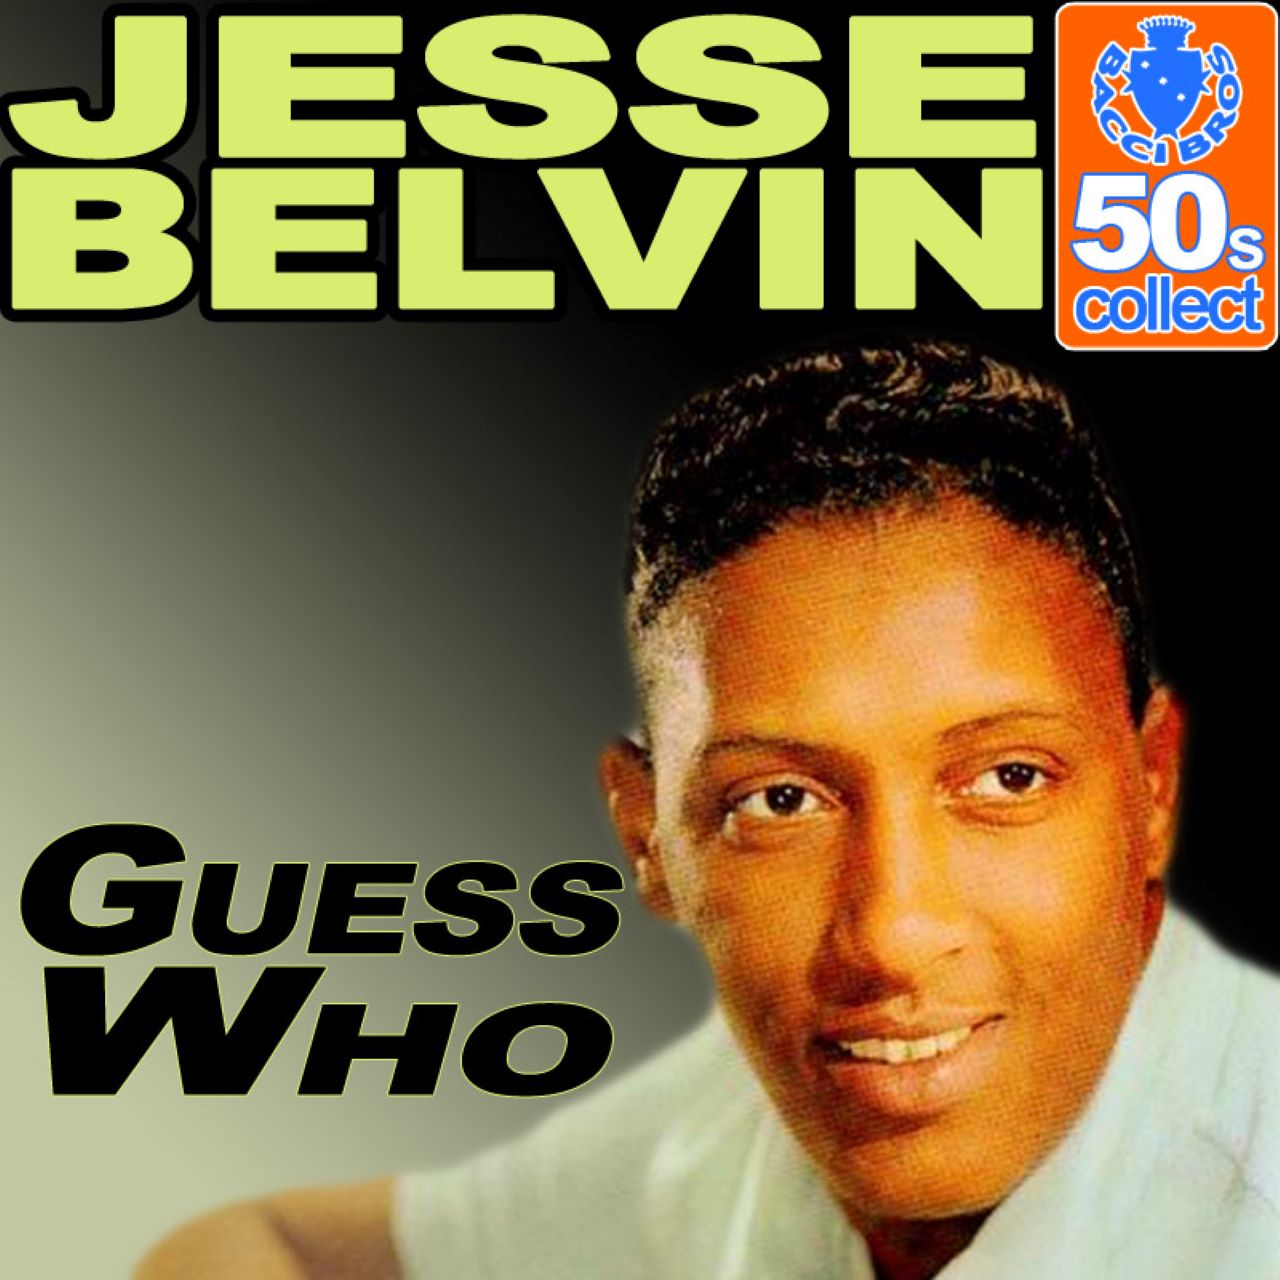 Jesse Belvin - Guess Who